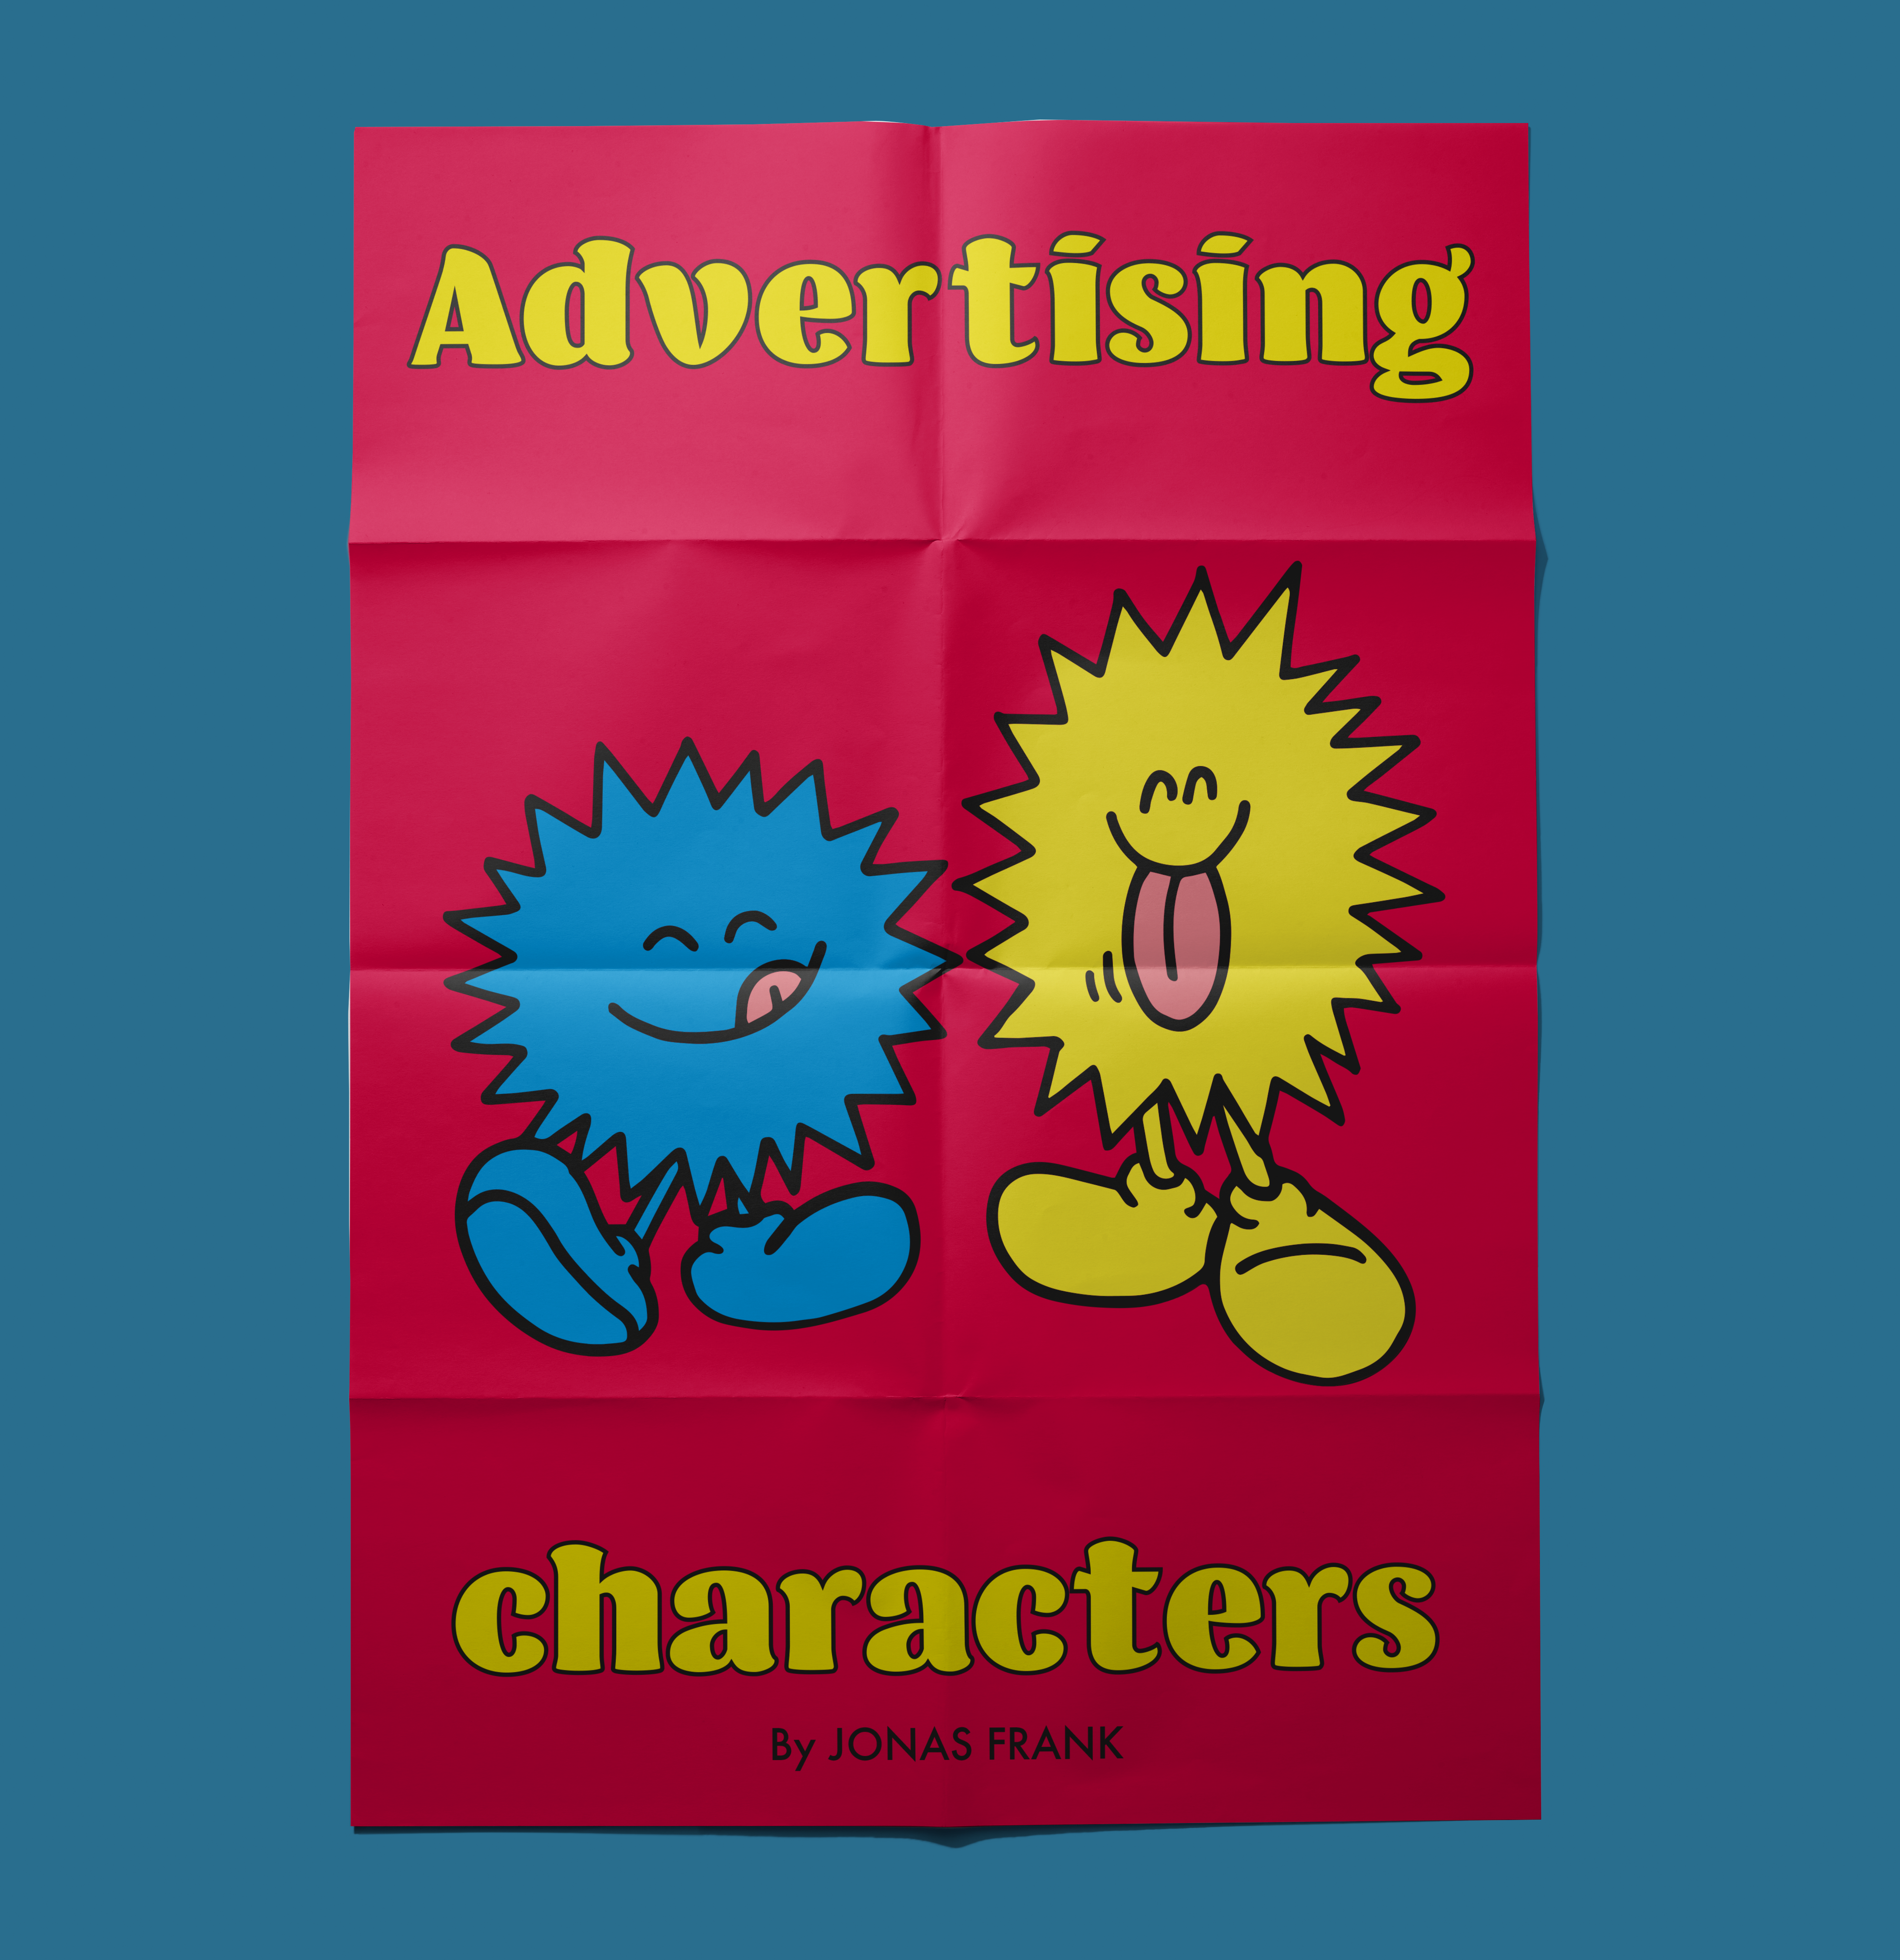 Advertising characters